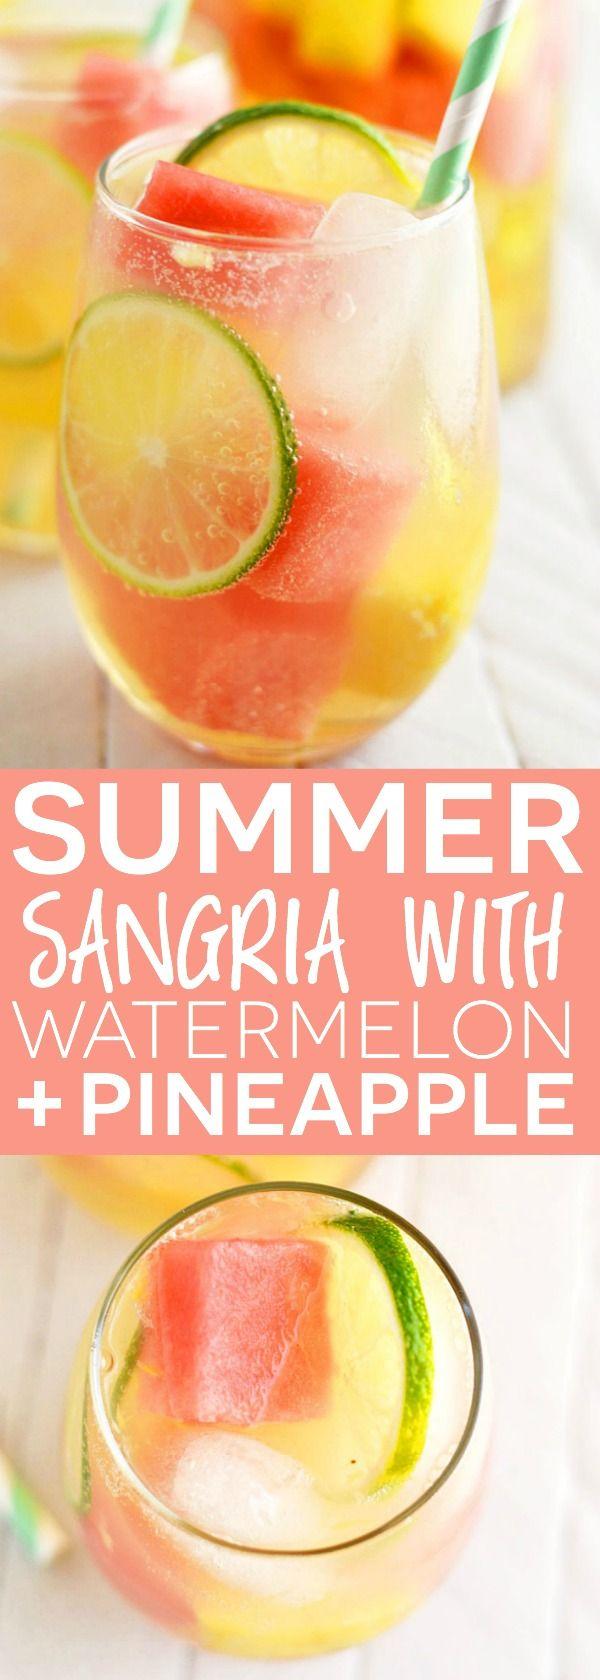 Hochzeit - Summer Sangria With Watermelon And Pineapple